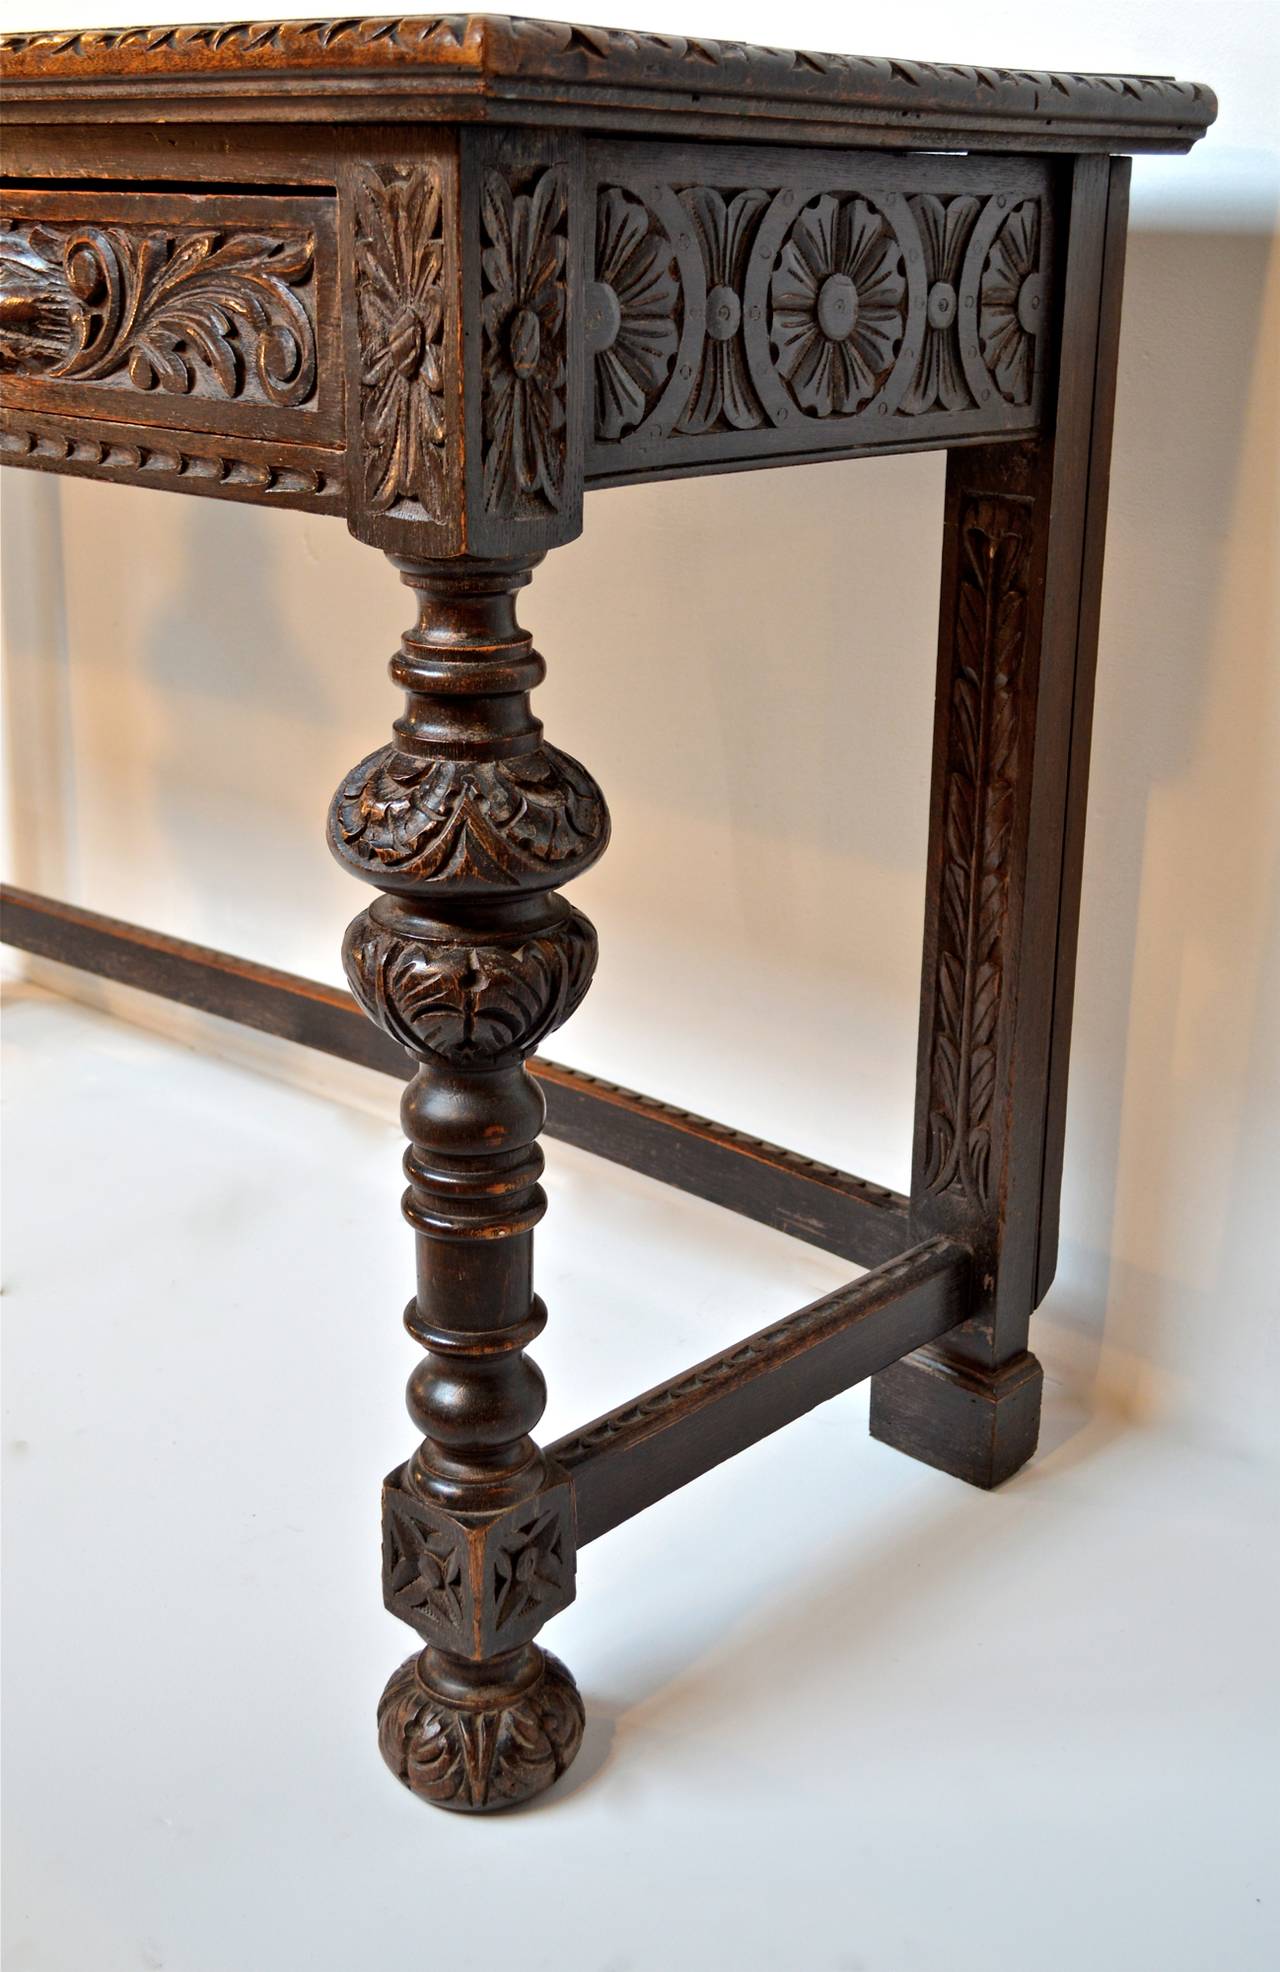 Great Britain (UK) Console Table in Oak by James Shoolbred